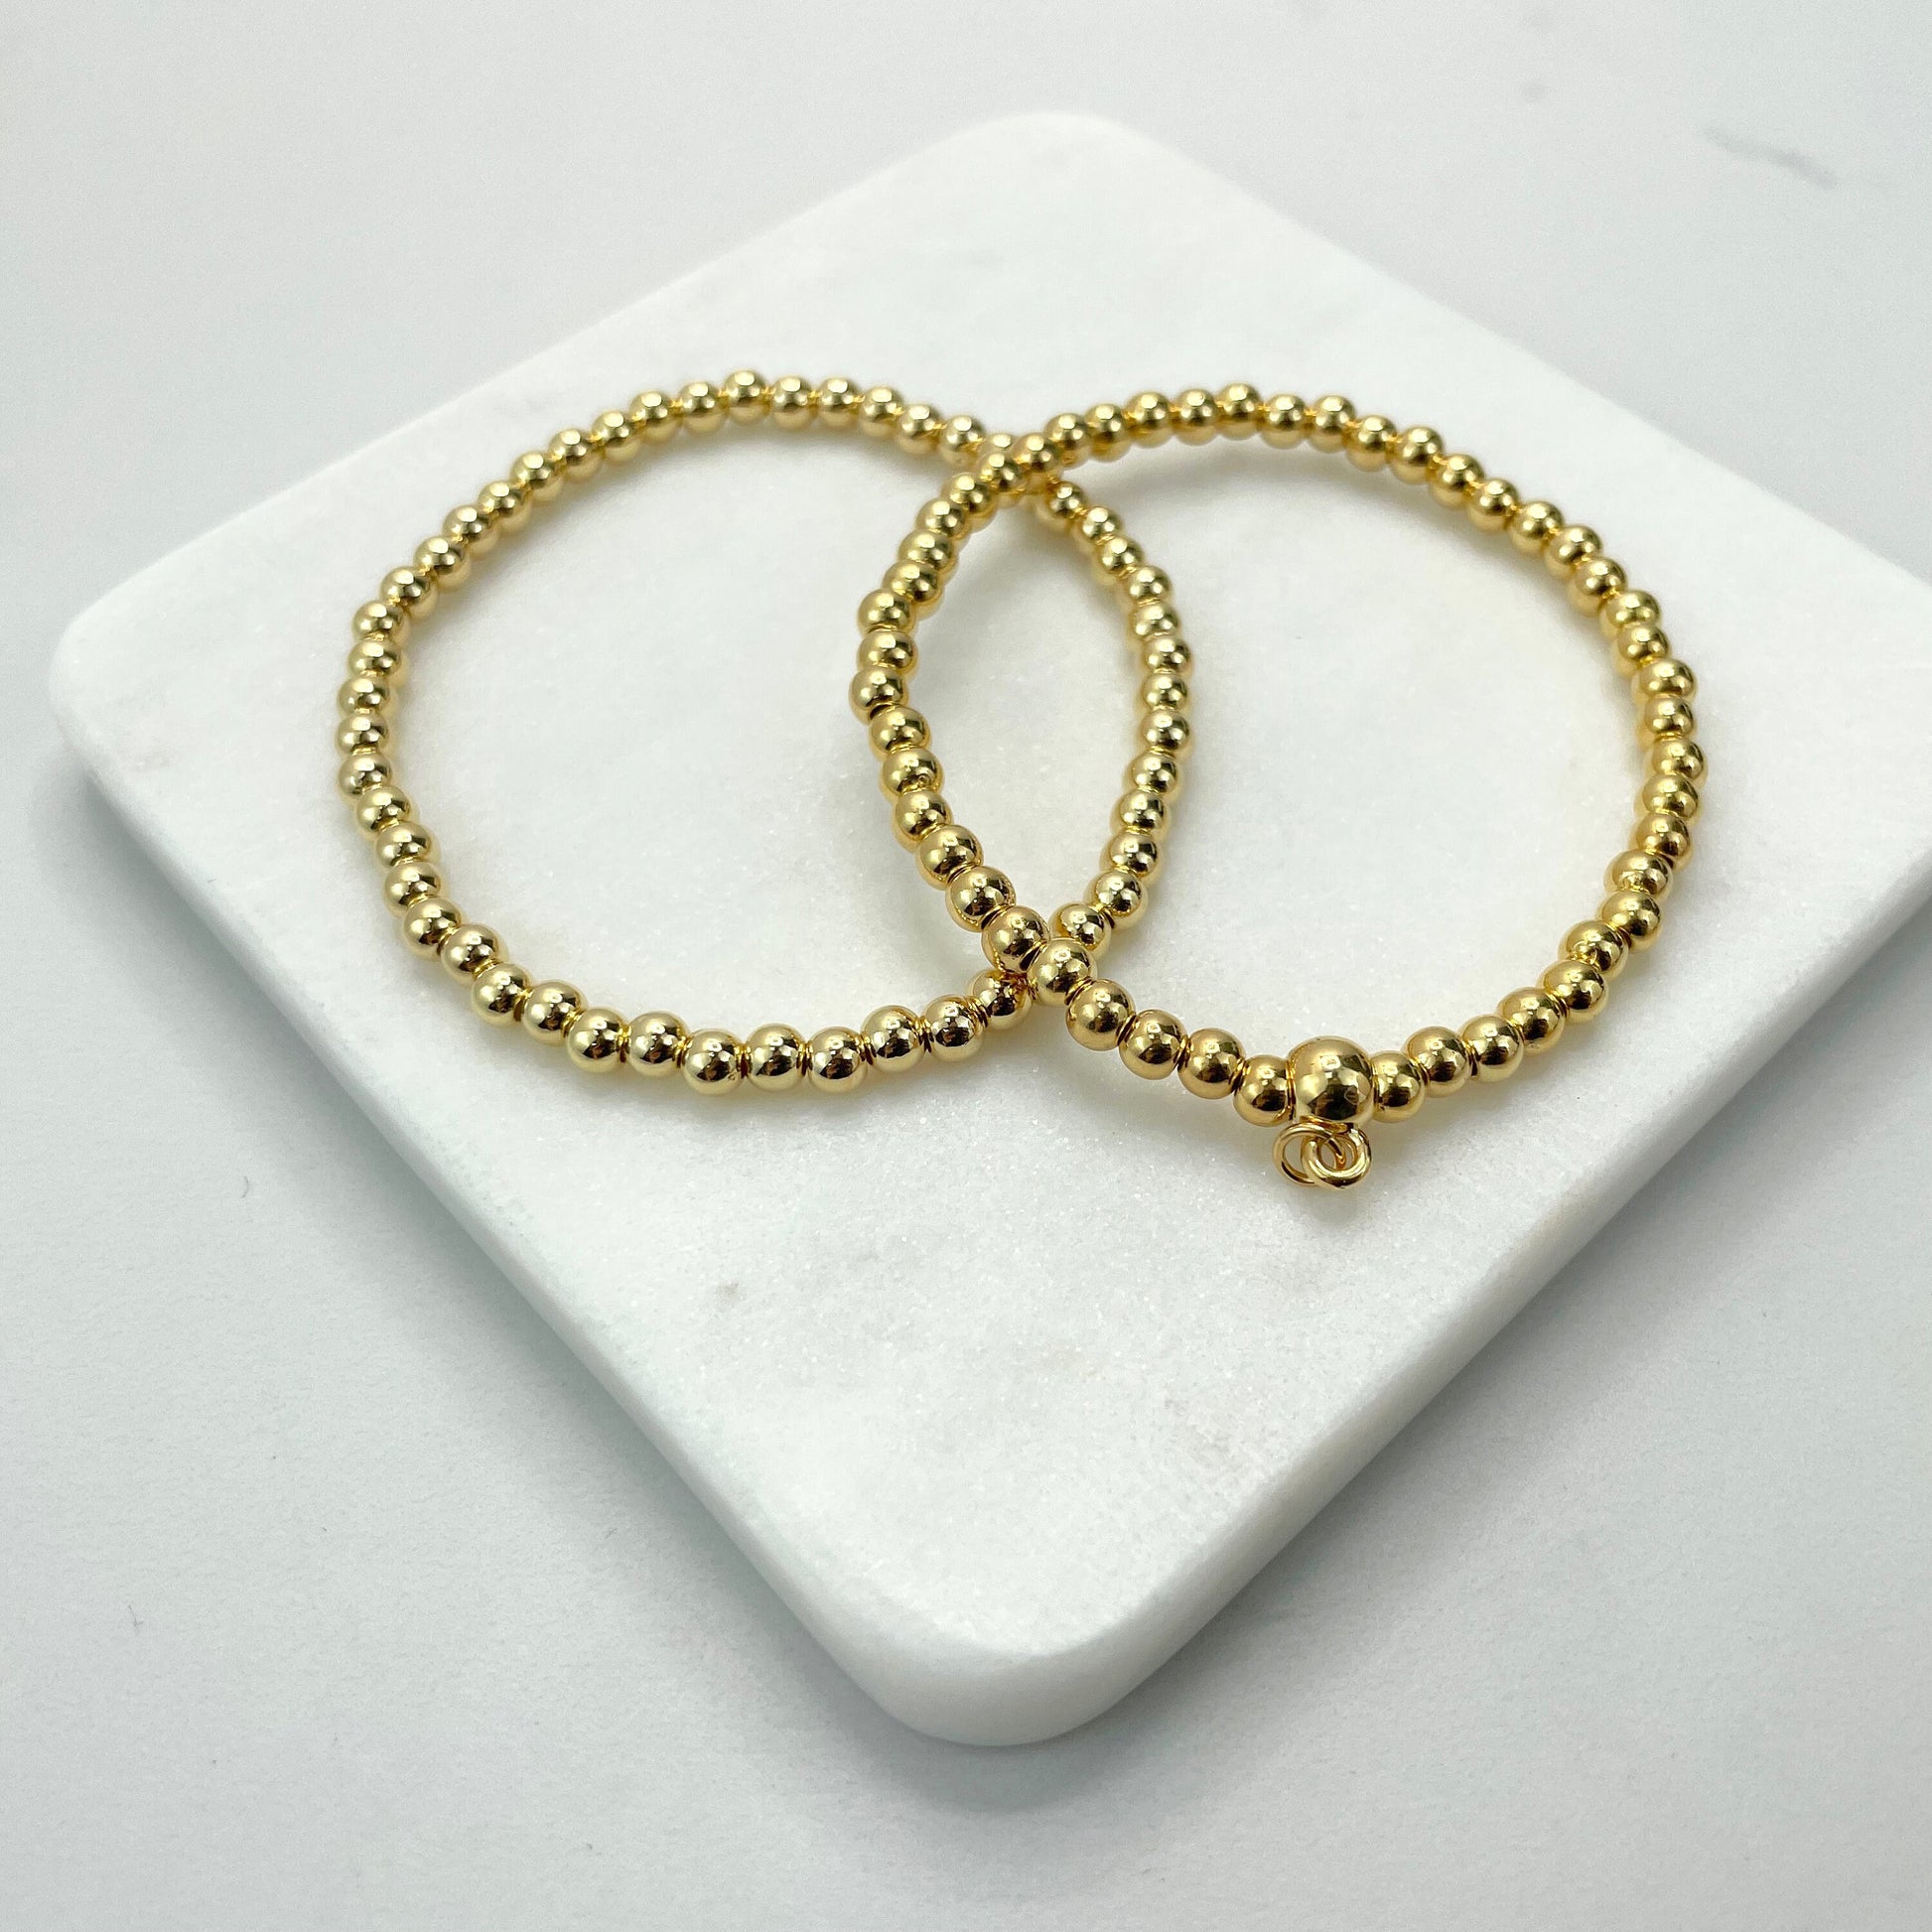 18k Gold Filled Beads 10mm, 8mm, 6mm or 4mm, Beaded Bracelet Wholesale Jewelry Making Supplies